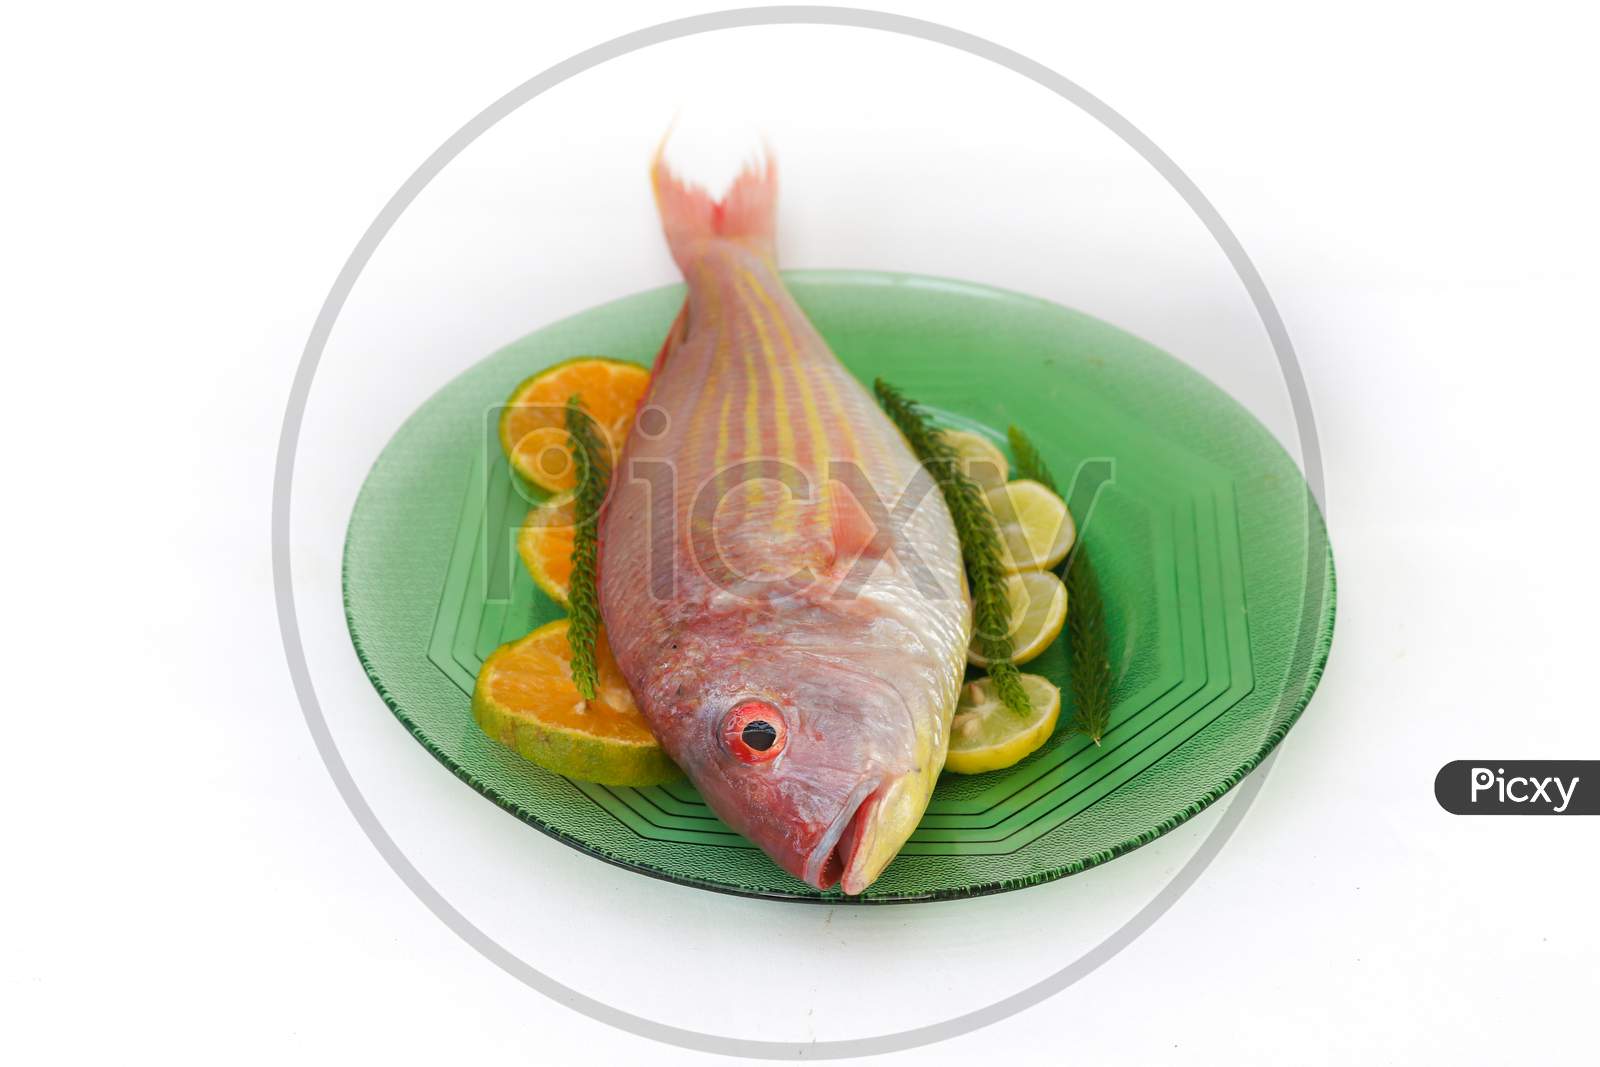 Close Up View Of Fresh Pink Perch (Thread Finned Bream) Decorated With Lemon Slice,Orange Slice And Curry Leaves On A Glass Plate ,White Background,Selective Focus.